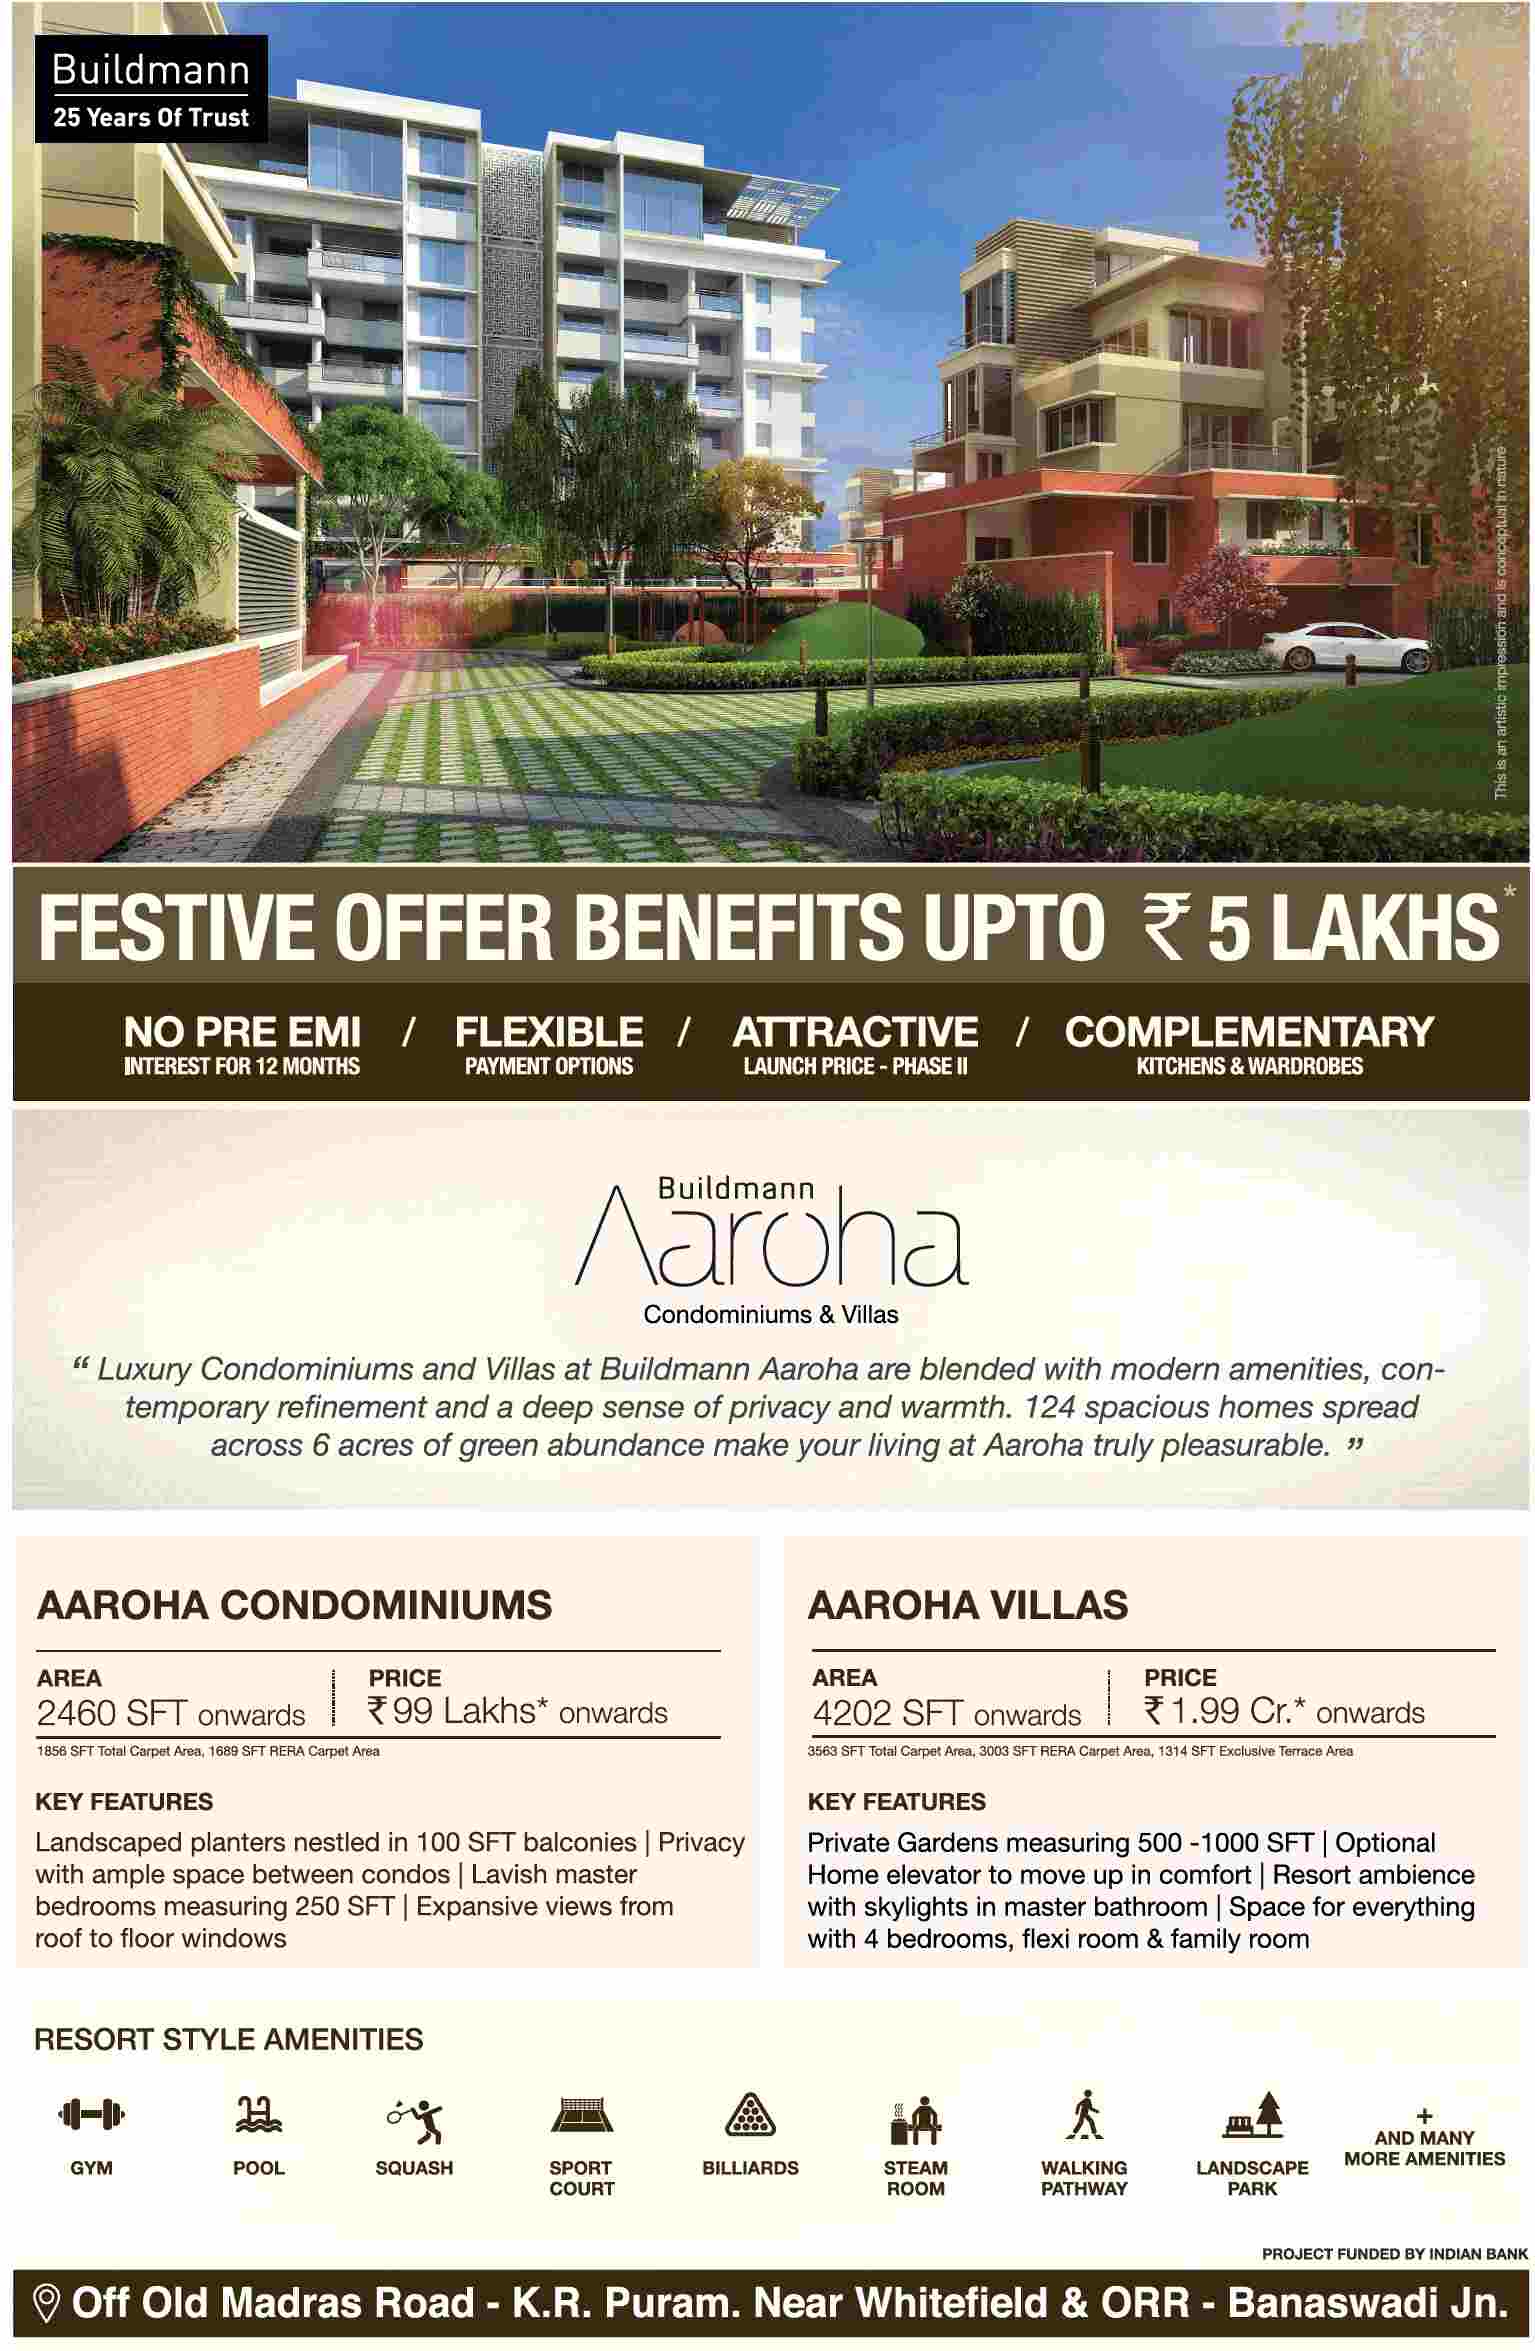 Experience modern amenities with a deep sense of privacy & warmth at Buildmann Aaroha in Bangalore Update